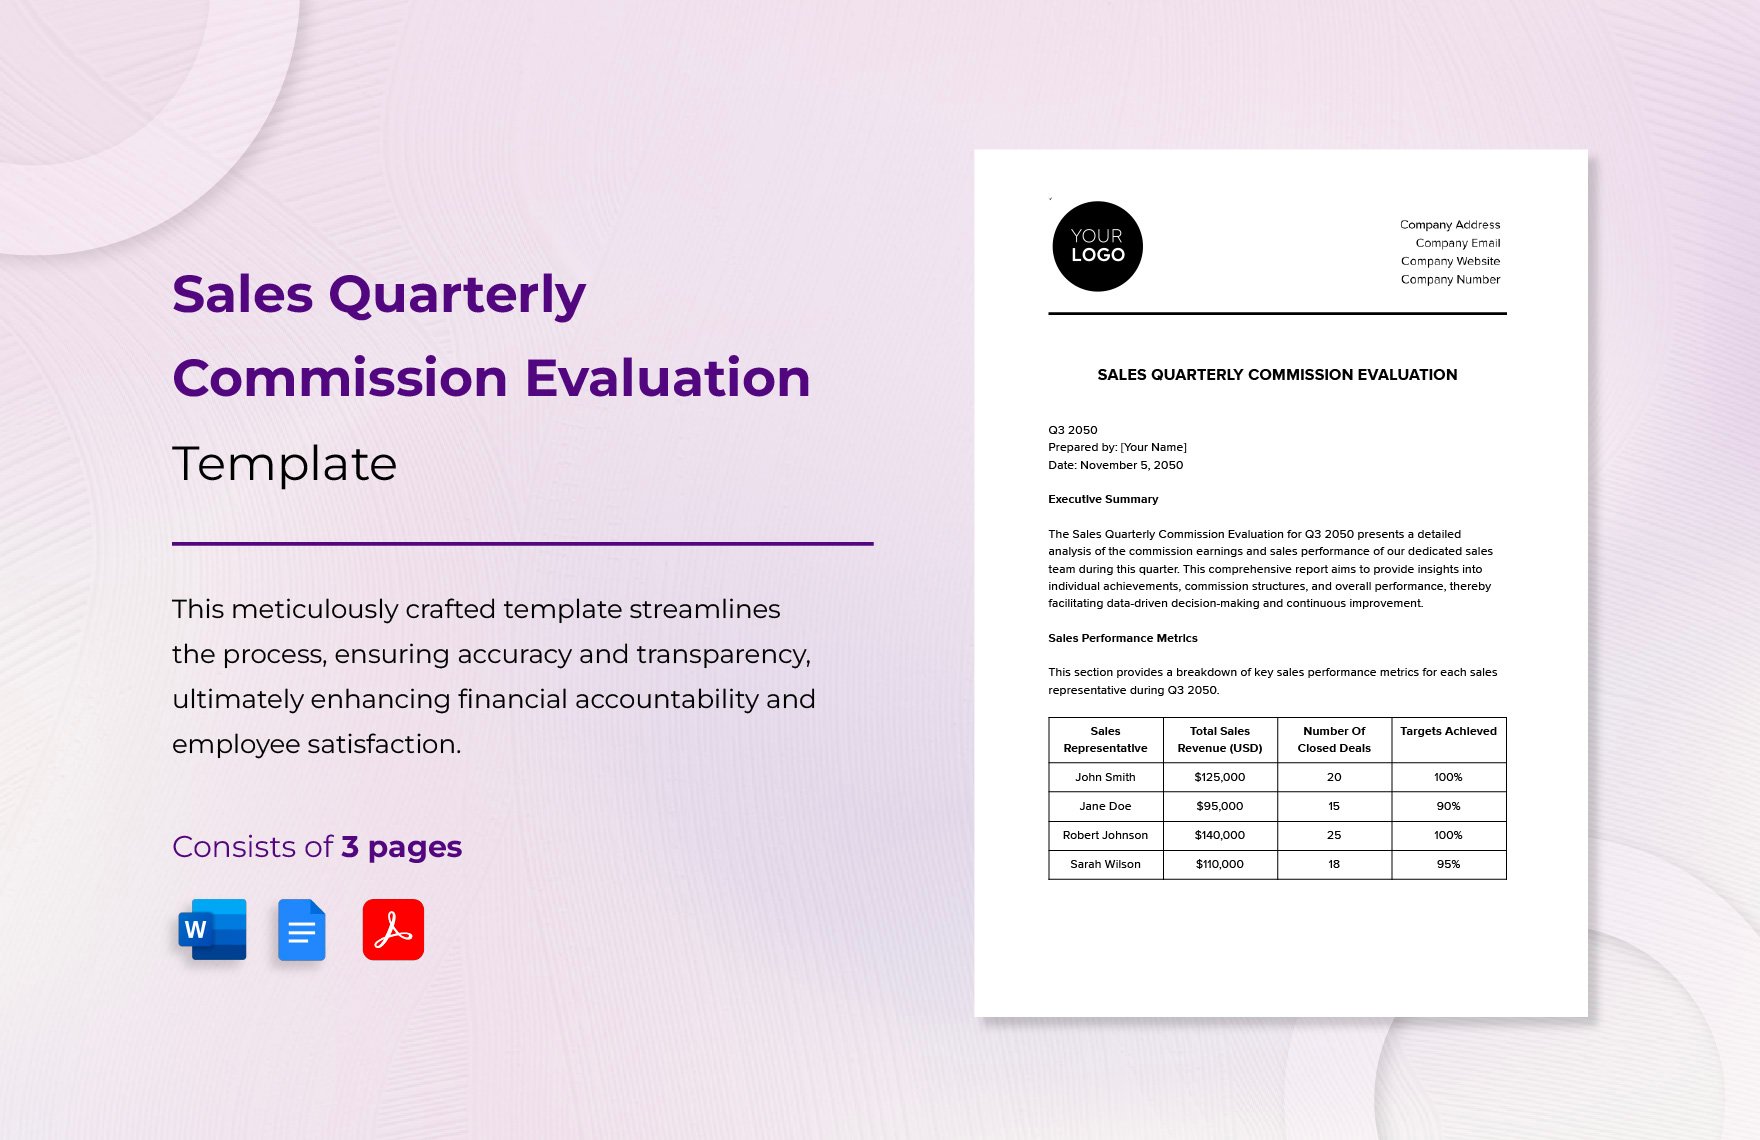 Sales Quarterly Commission Evaluation Template in Word, Google Docs, PDF